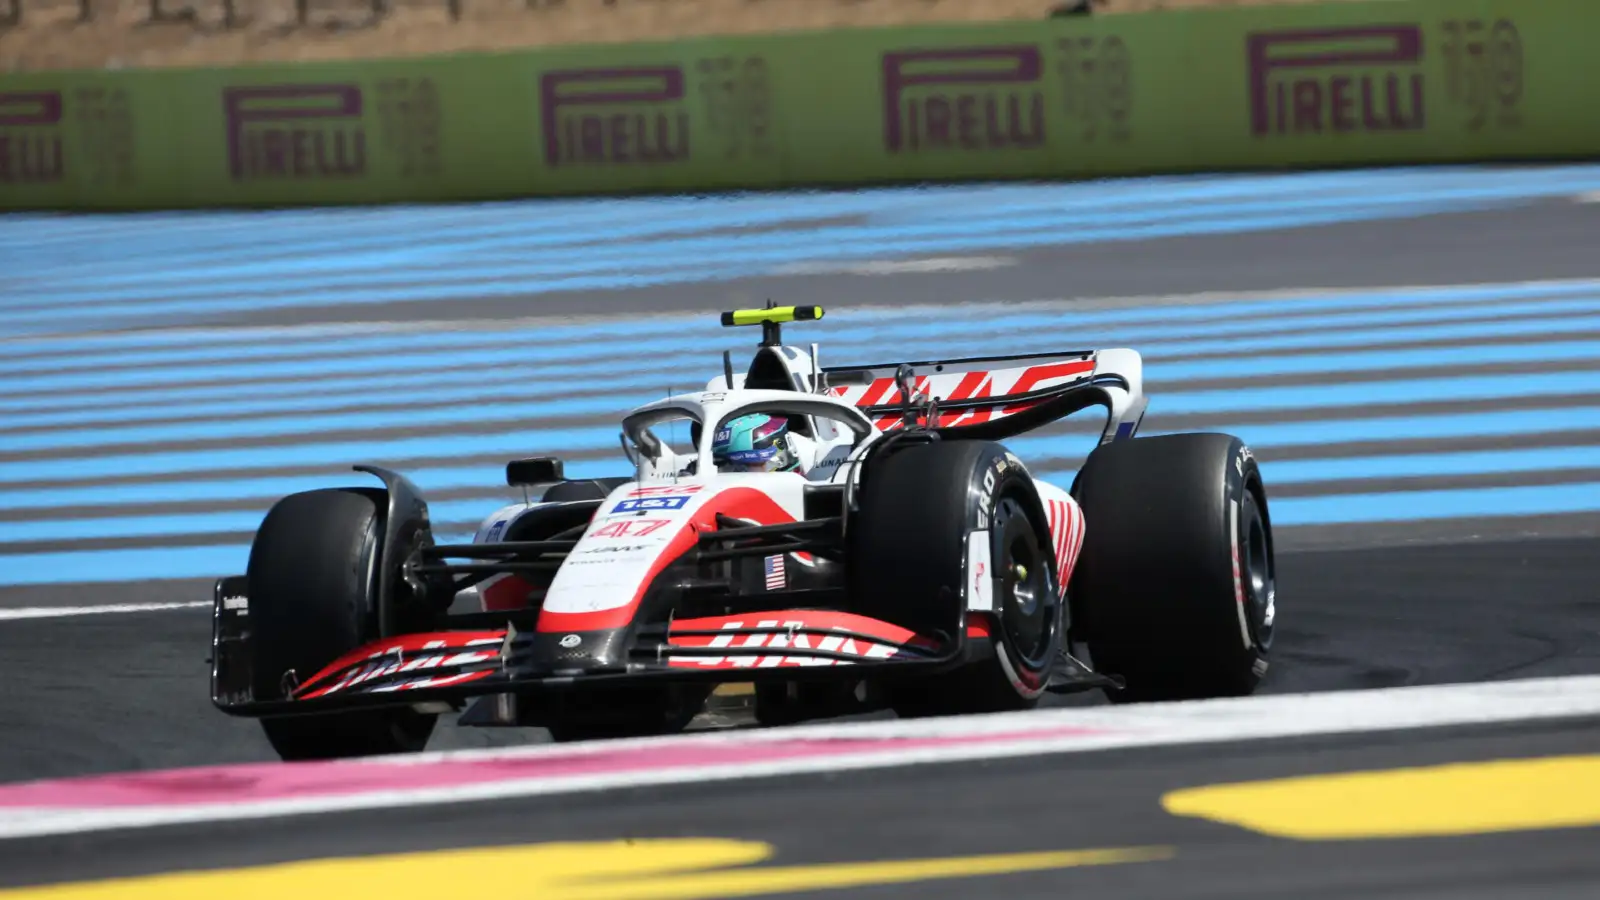 Haas' Mick Schumacher during the French Grand Prix weekend. Paul Ricard, July 2022.